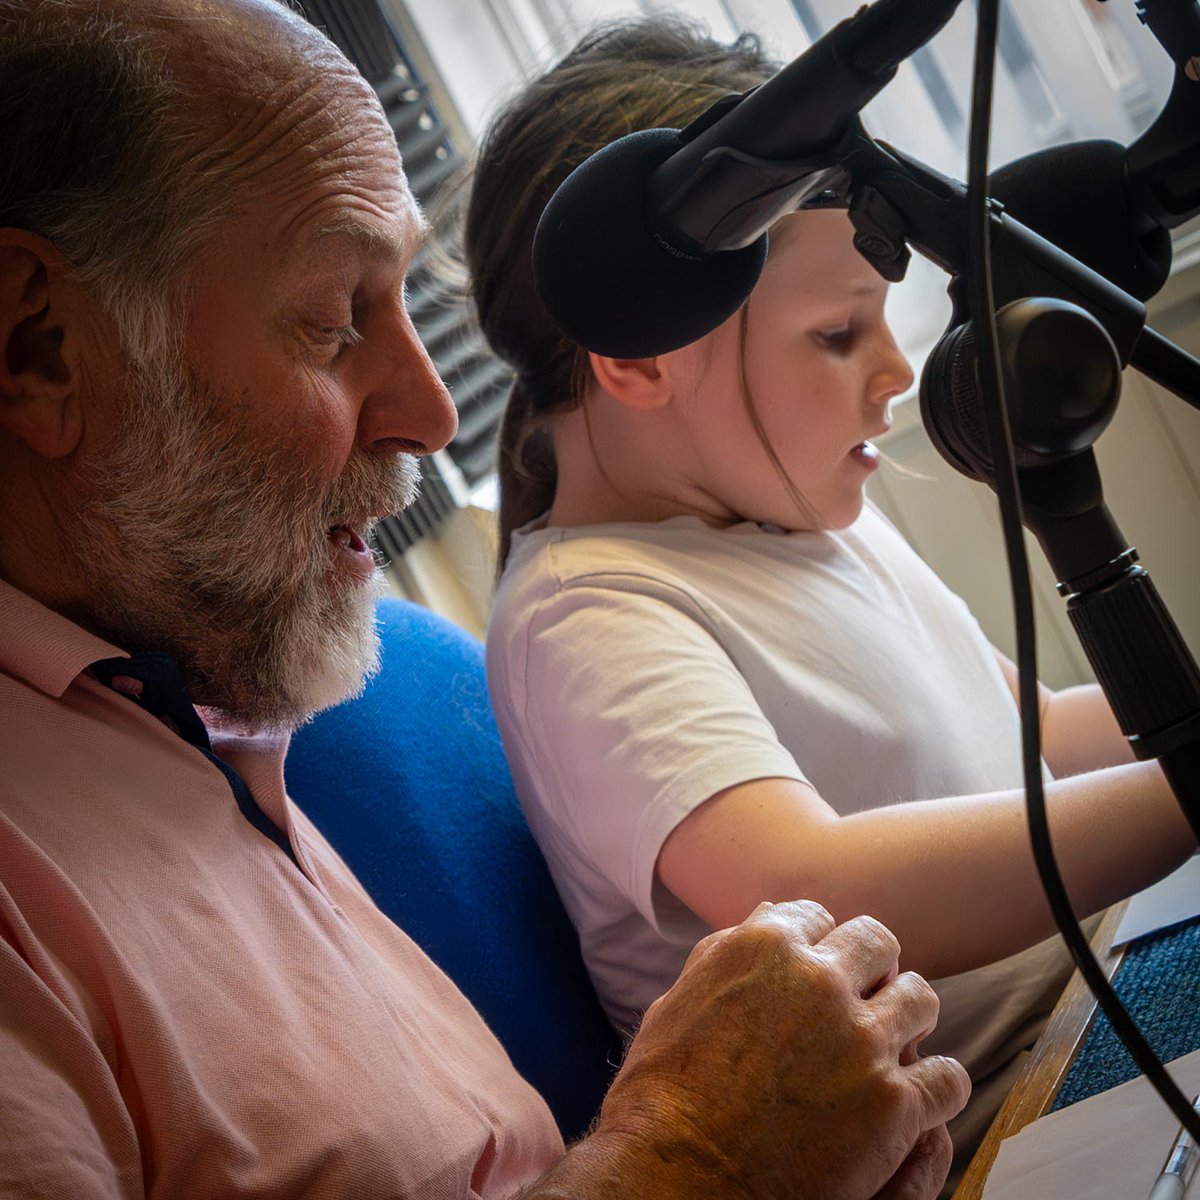 At the wonderful TD9 Radio in Hawick today recording a series of adverts you will hear on both TD9 Radio & Galashiels-based TD1 Radio from Monday next week - featuring Alistair Moffat and his talented granddaughter Grace. TD9 &TD1 are festival Media Sponsors @td9radio @td1